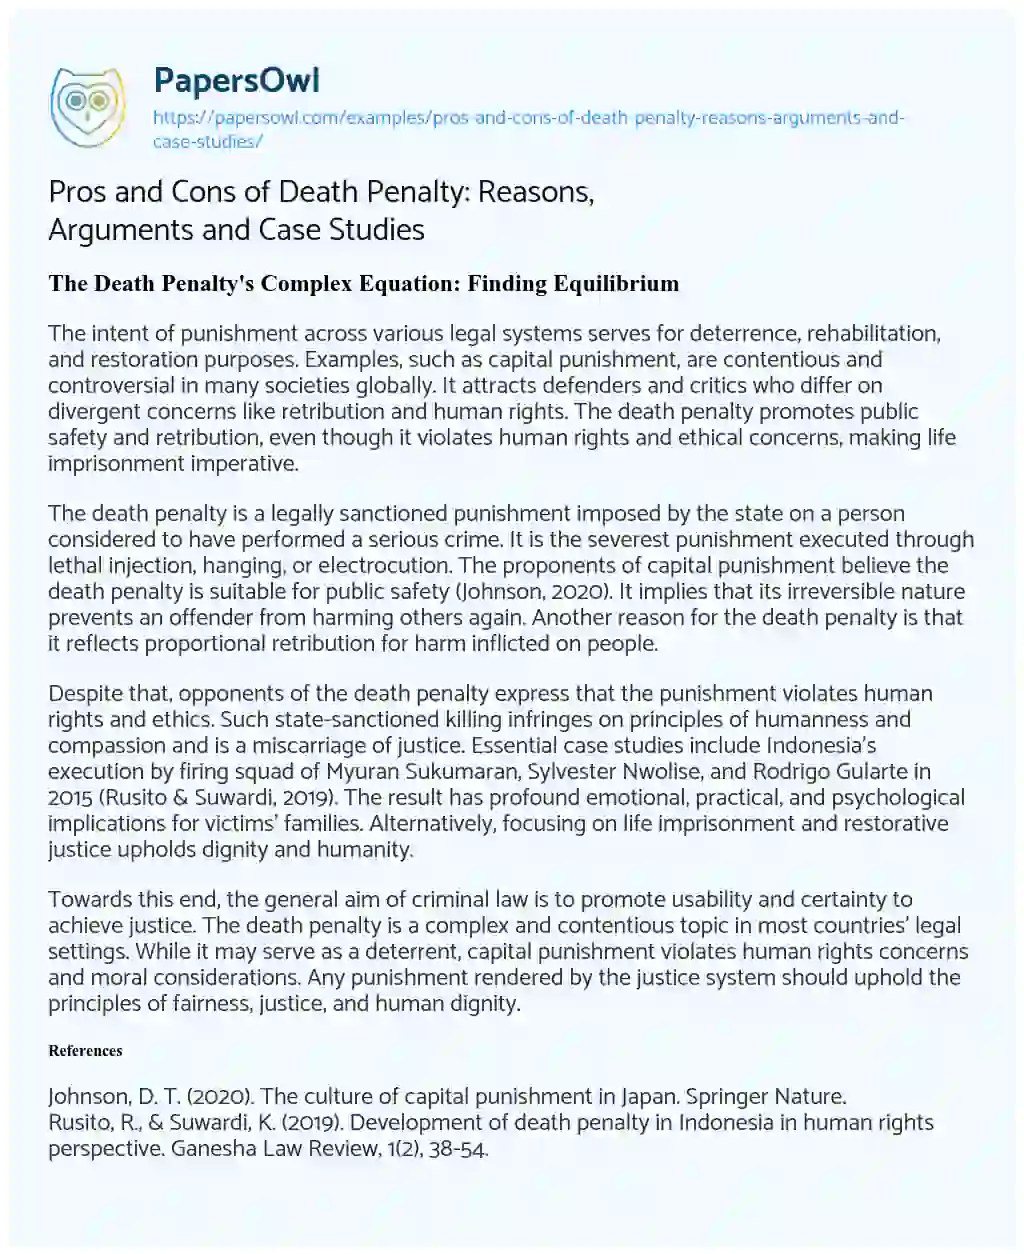 Essay on Pros and Cons of Death Penalty: Reasons, Arguments and Case Studies